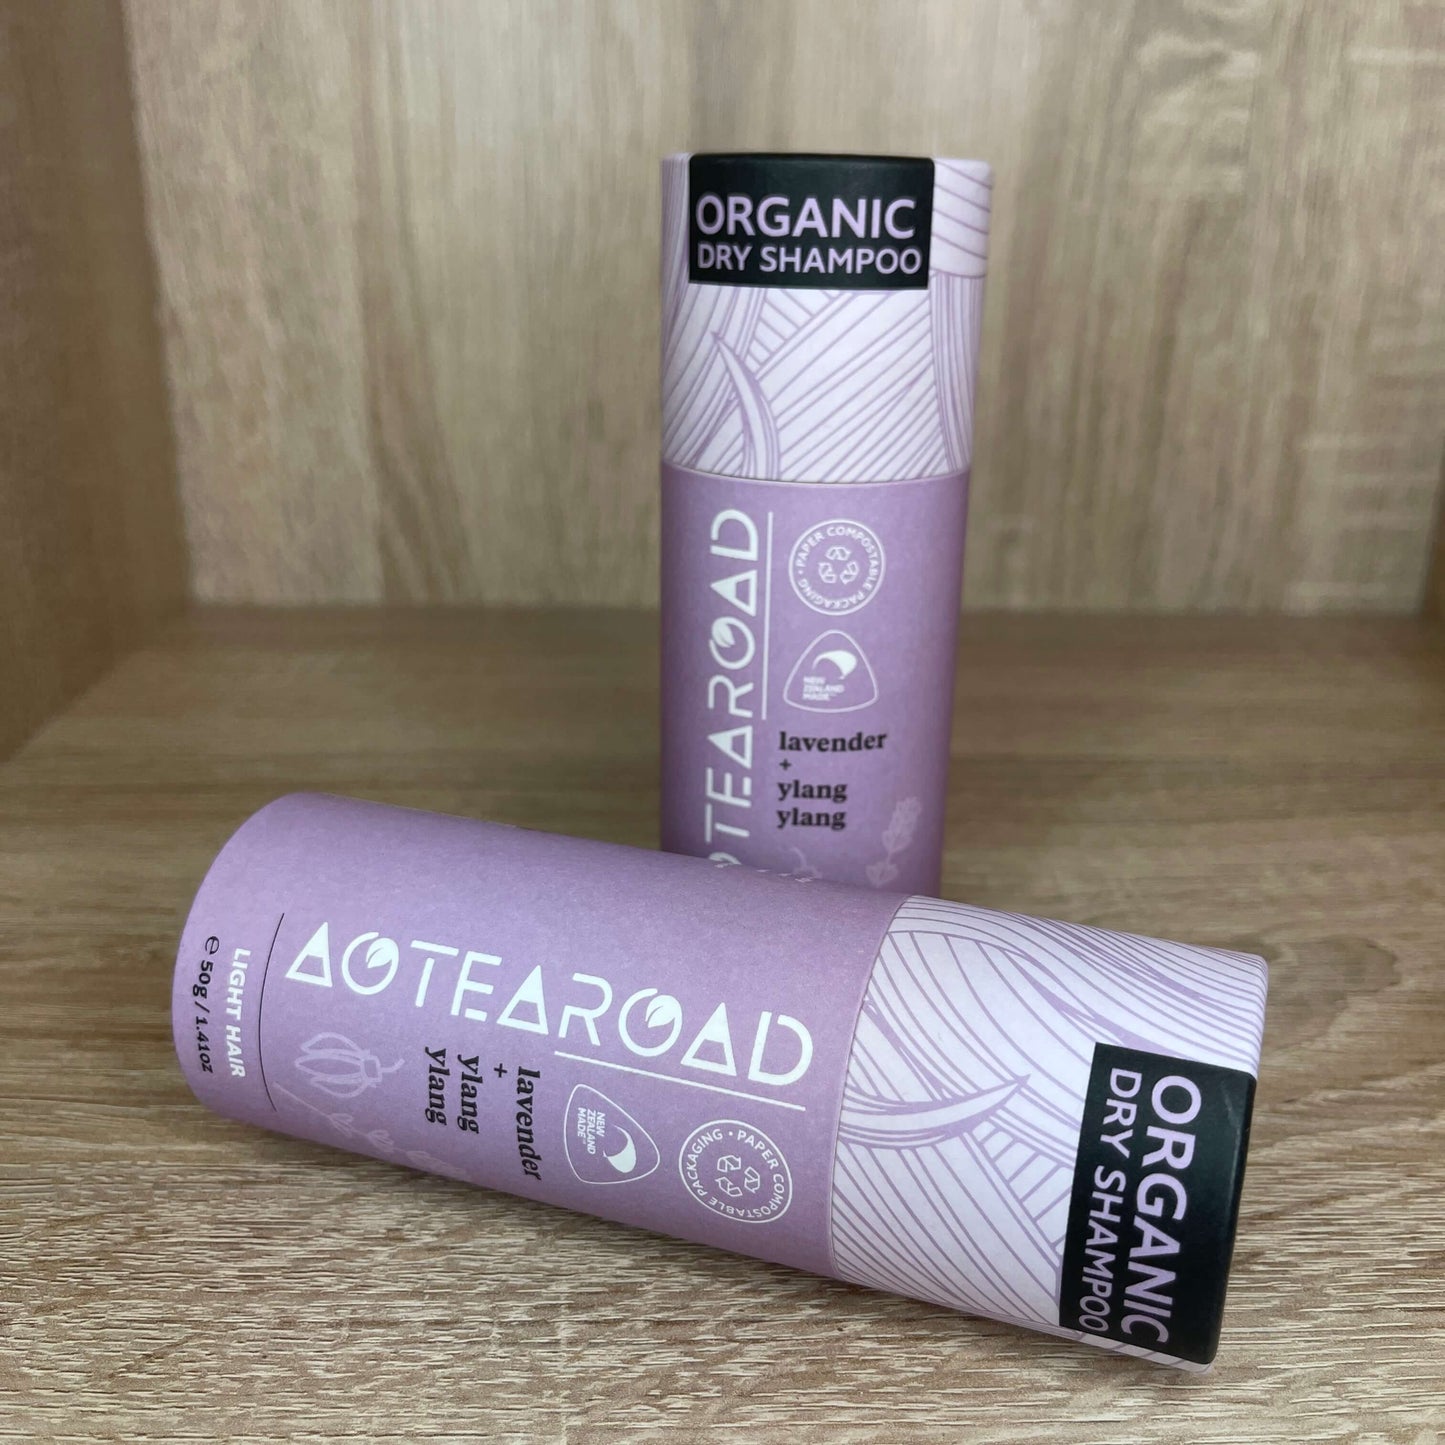 Organic dry shampoo for light hair in a cardboard tube from Aotearoad.